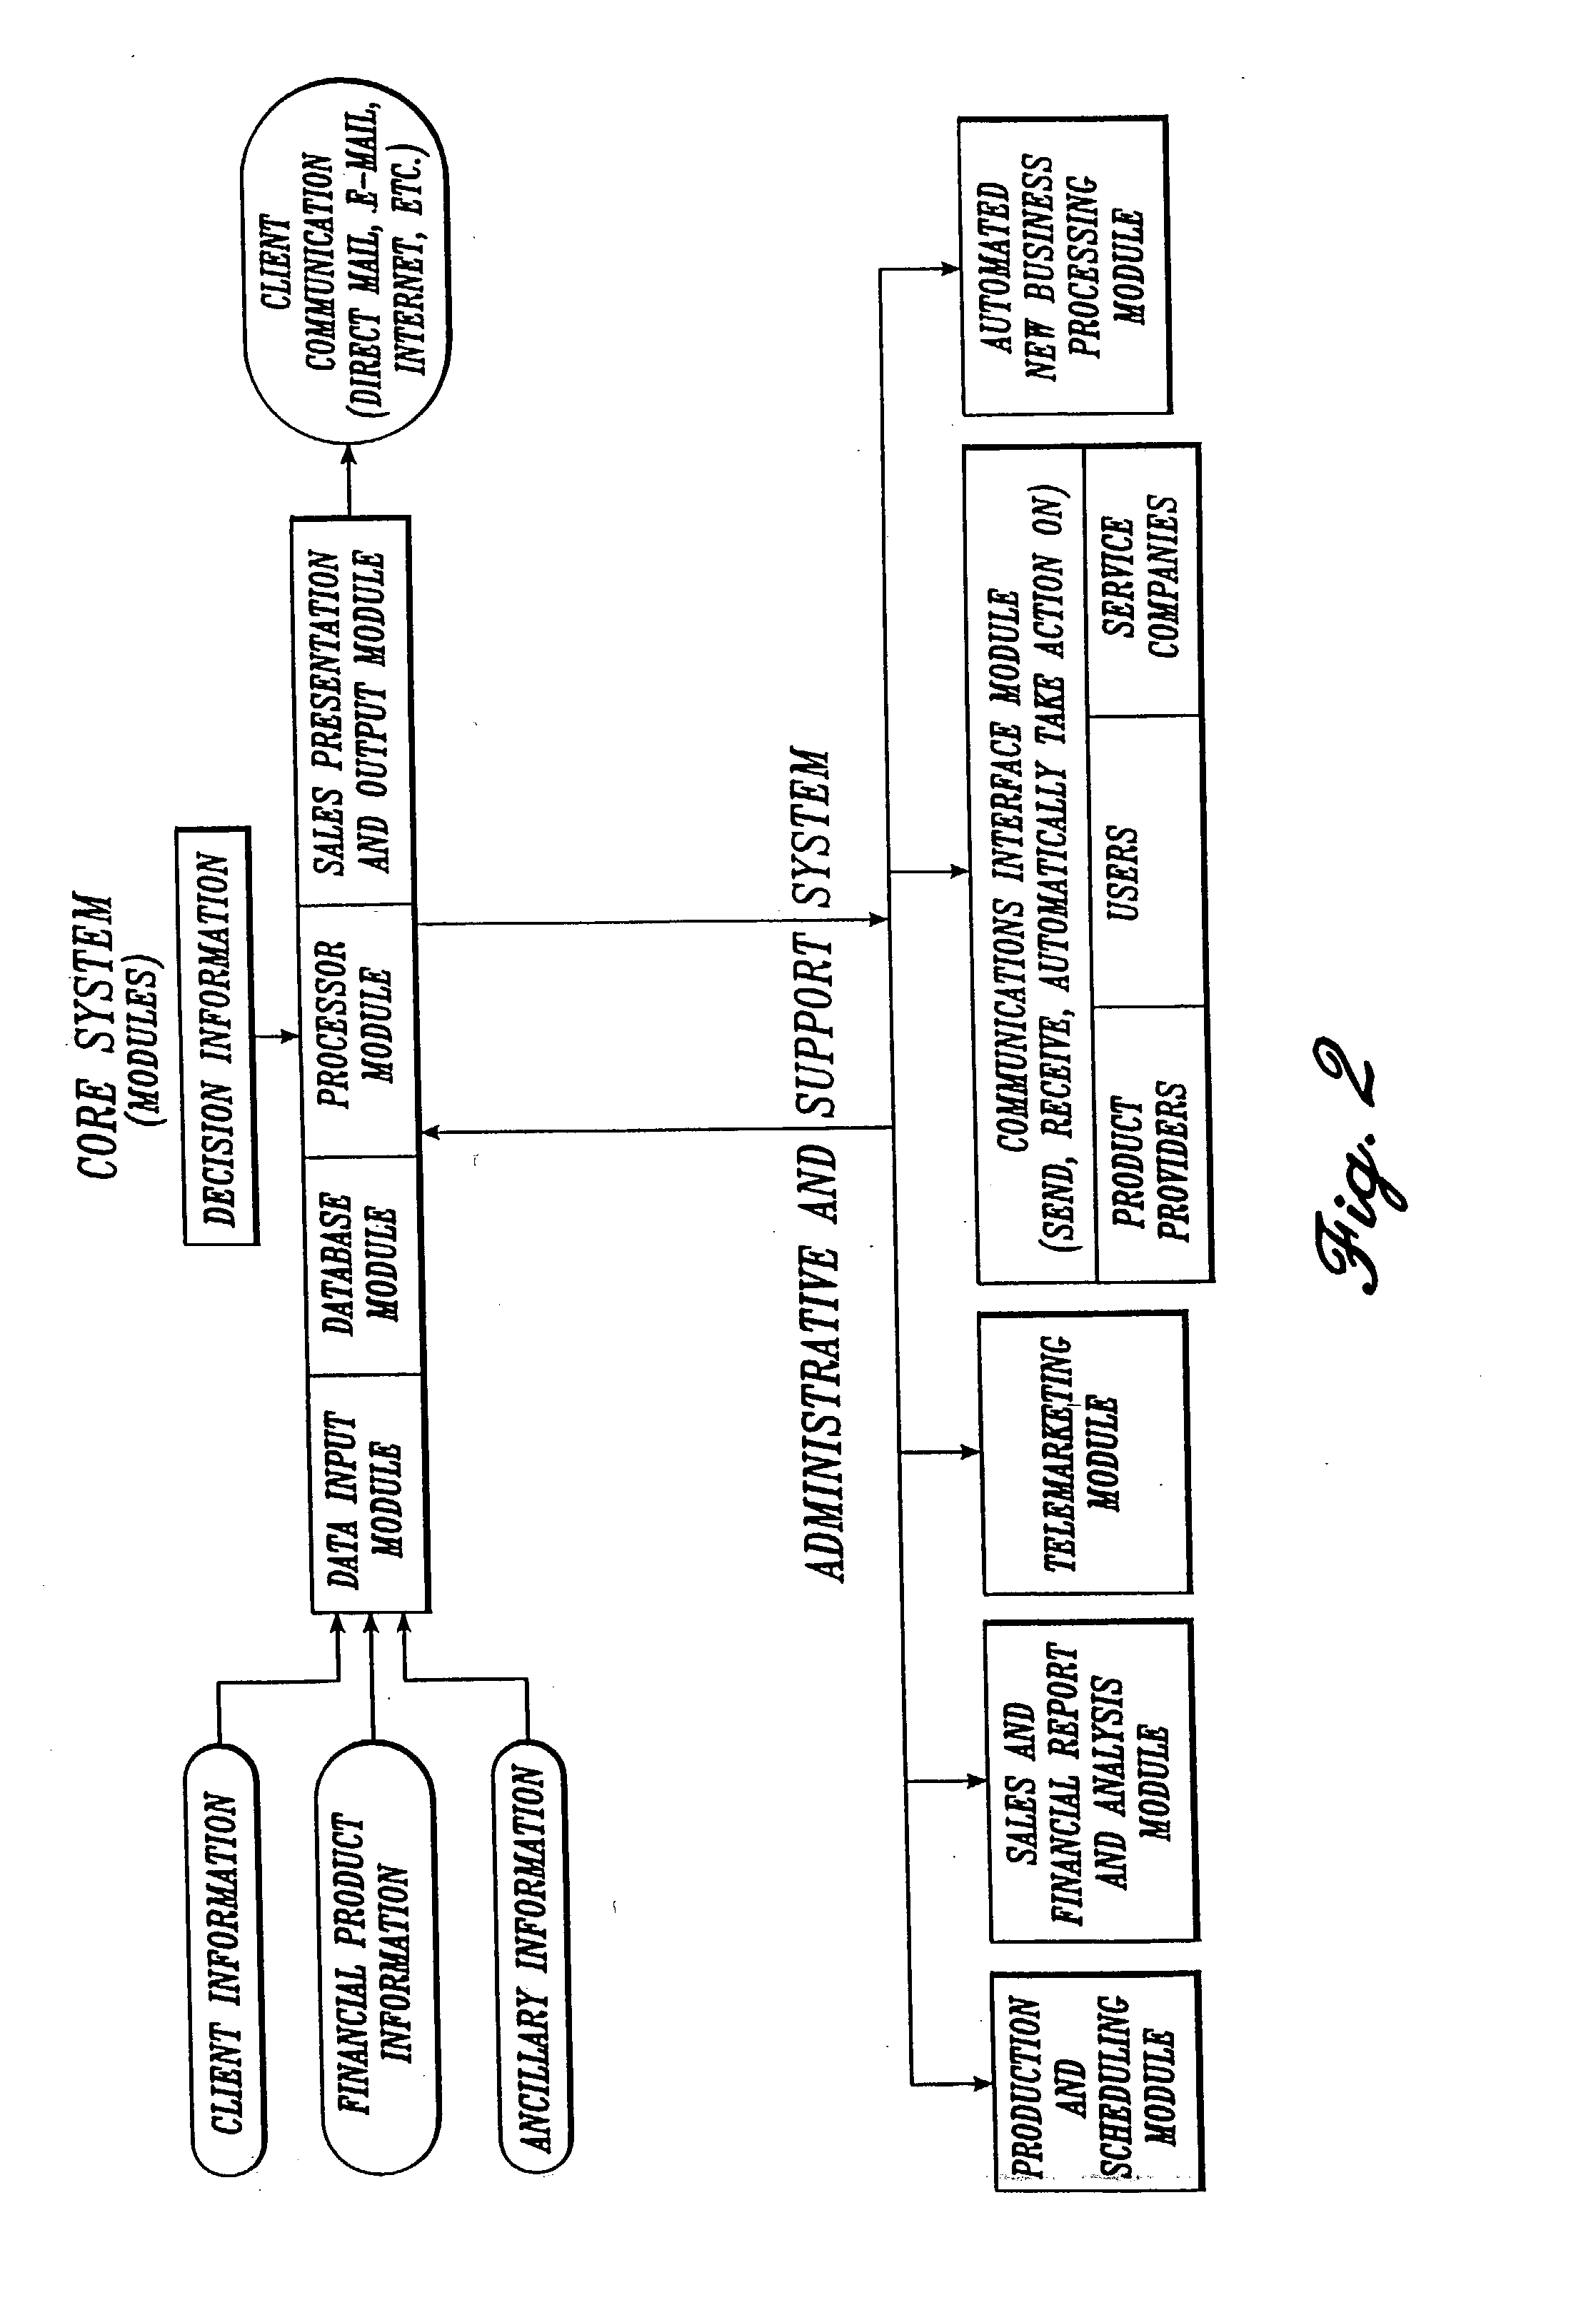 System, method, and computer program product for selecting and presenting financial products and services